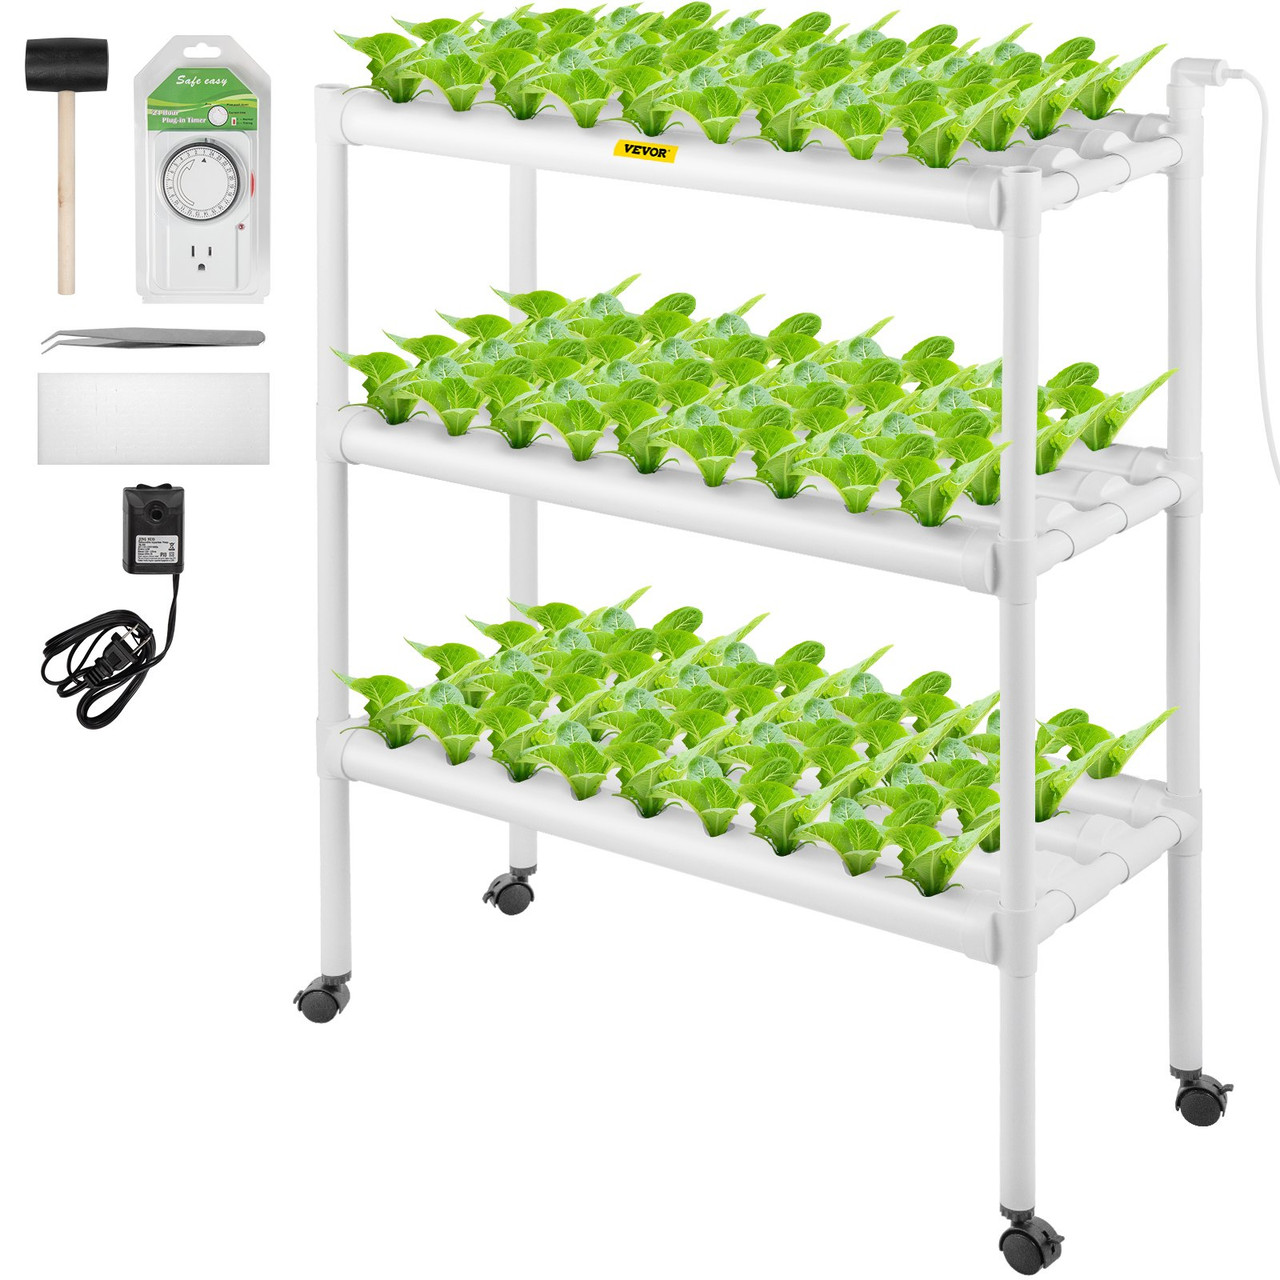 Hydroponics Growing System, 108 Sites 12 Food-Grade PVC-U Pipes, 3 Layers Indoor Planting Kit with Water Pump, Timer, Nest Basket, Sponge, for Fruits, Vegetables, Herbs, White